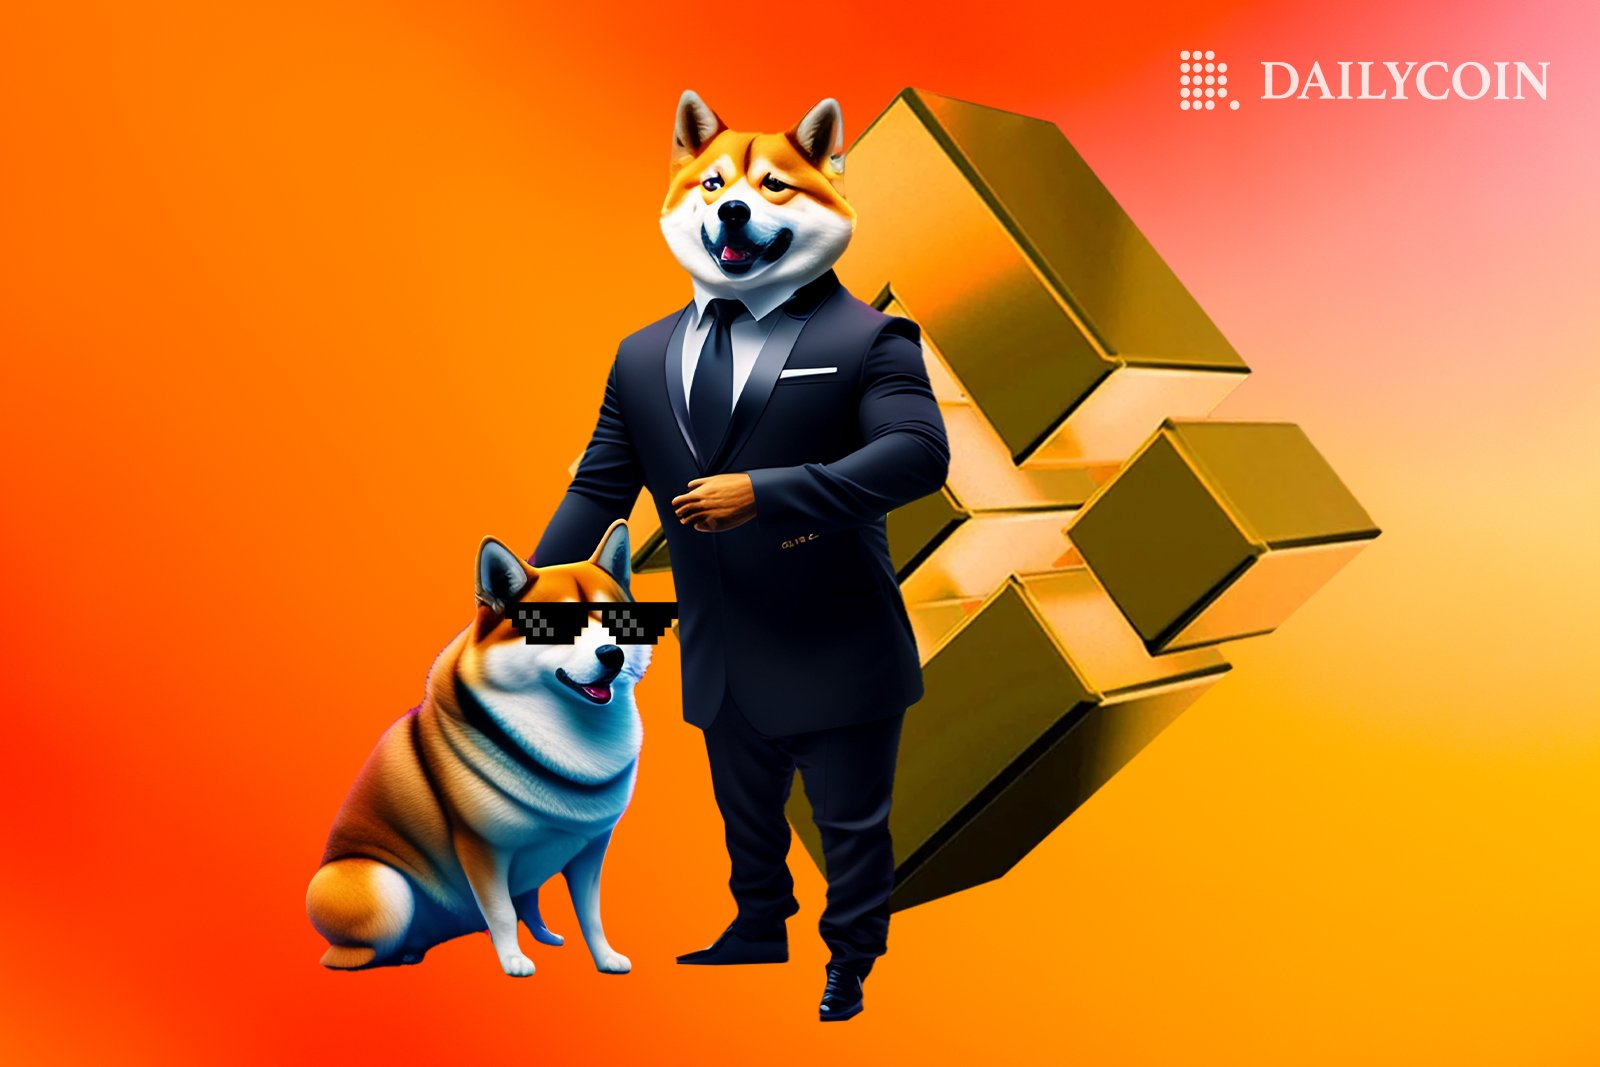 Dogecoin mascot dog in a businessman suit in front of Binance logo, smiling as DOGE overthrows BUSD by market capitalization.